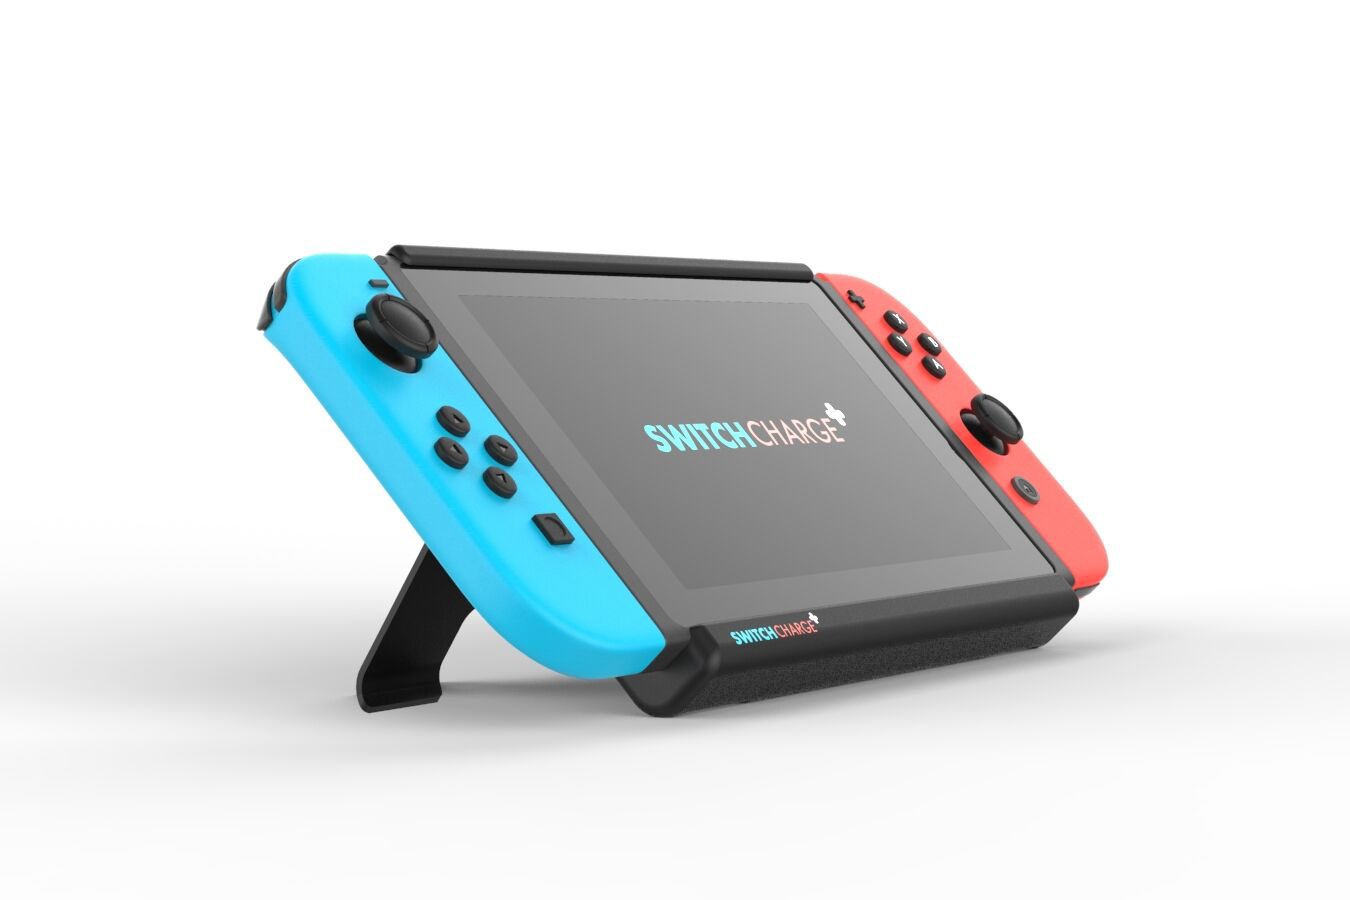 The S-Charge battery case for the Nintendo Switch is here